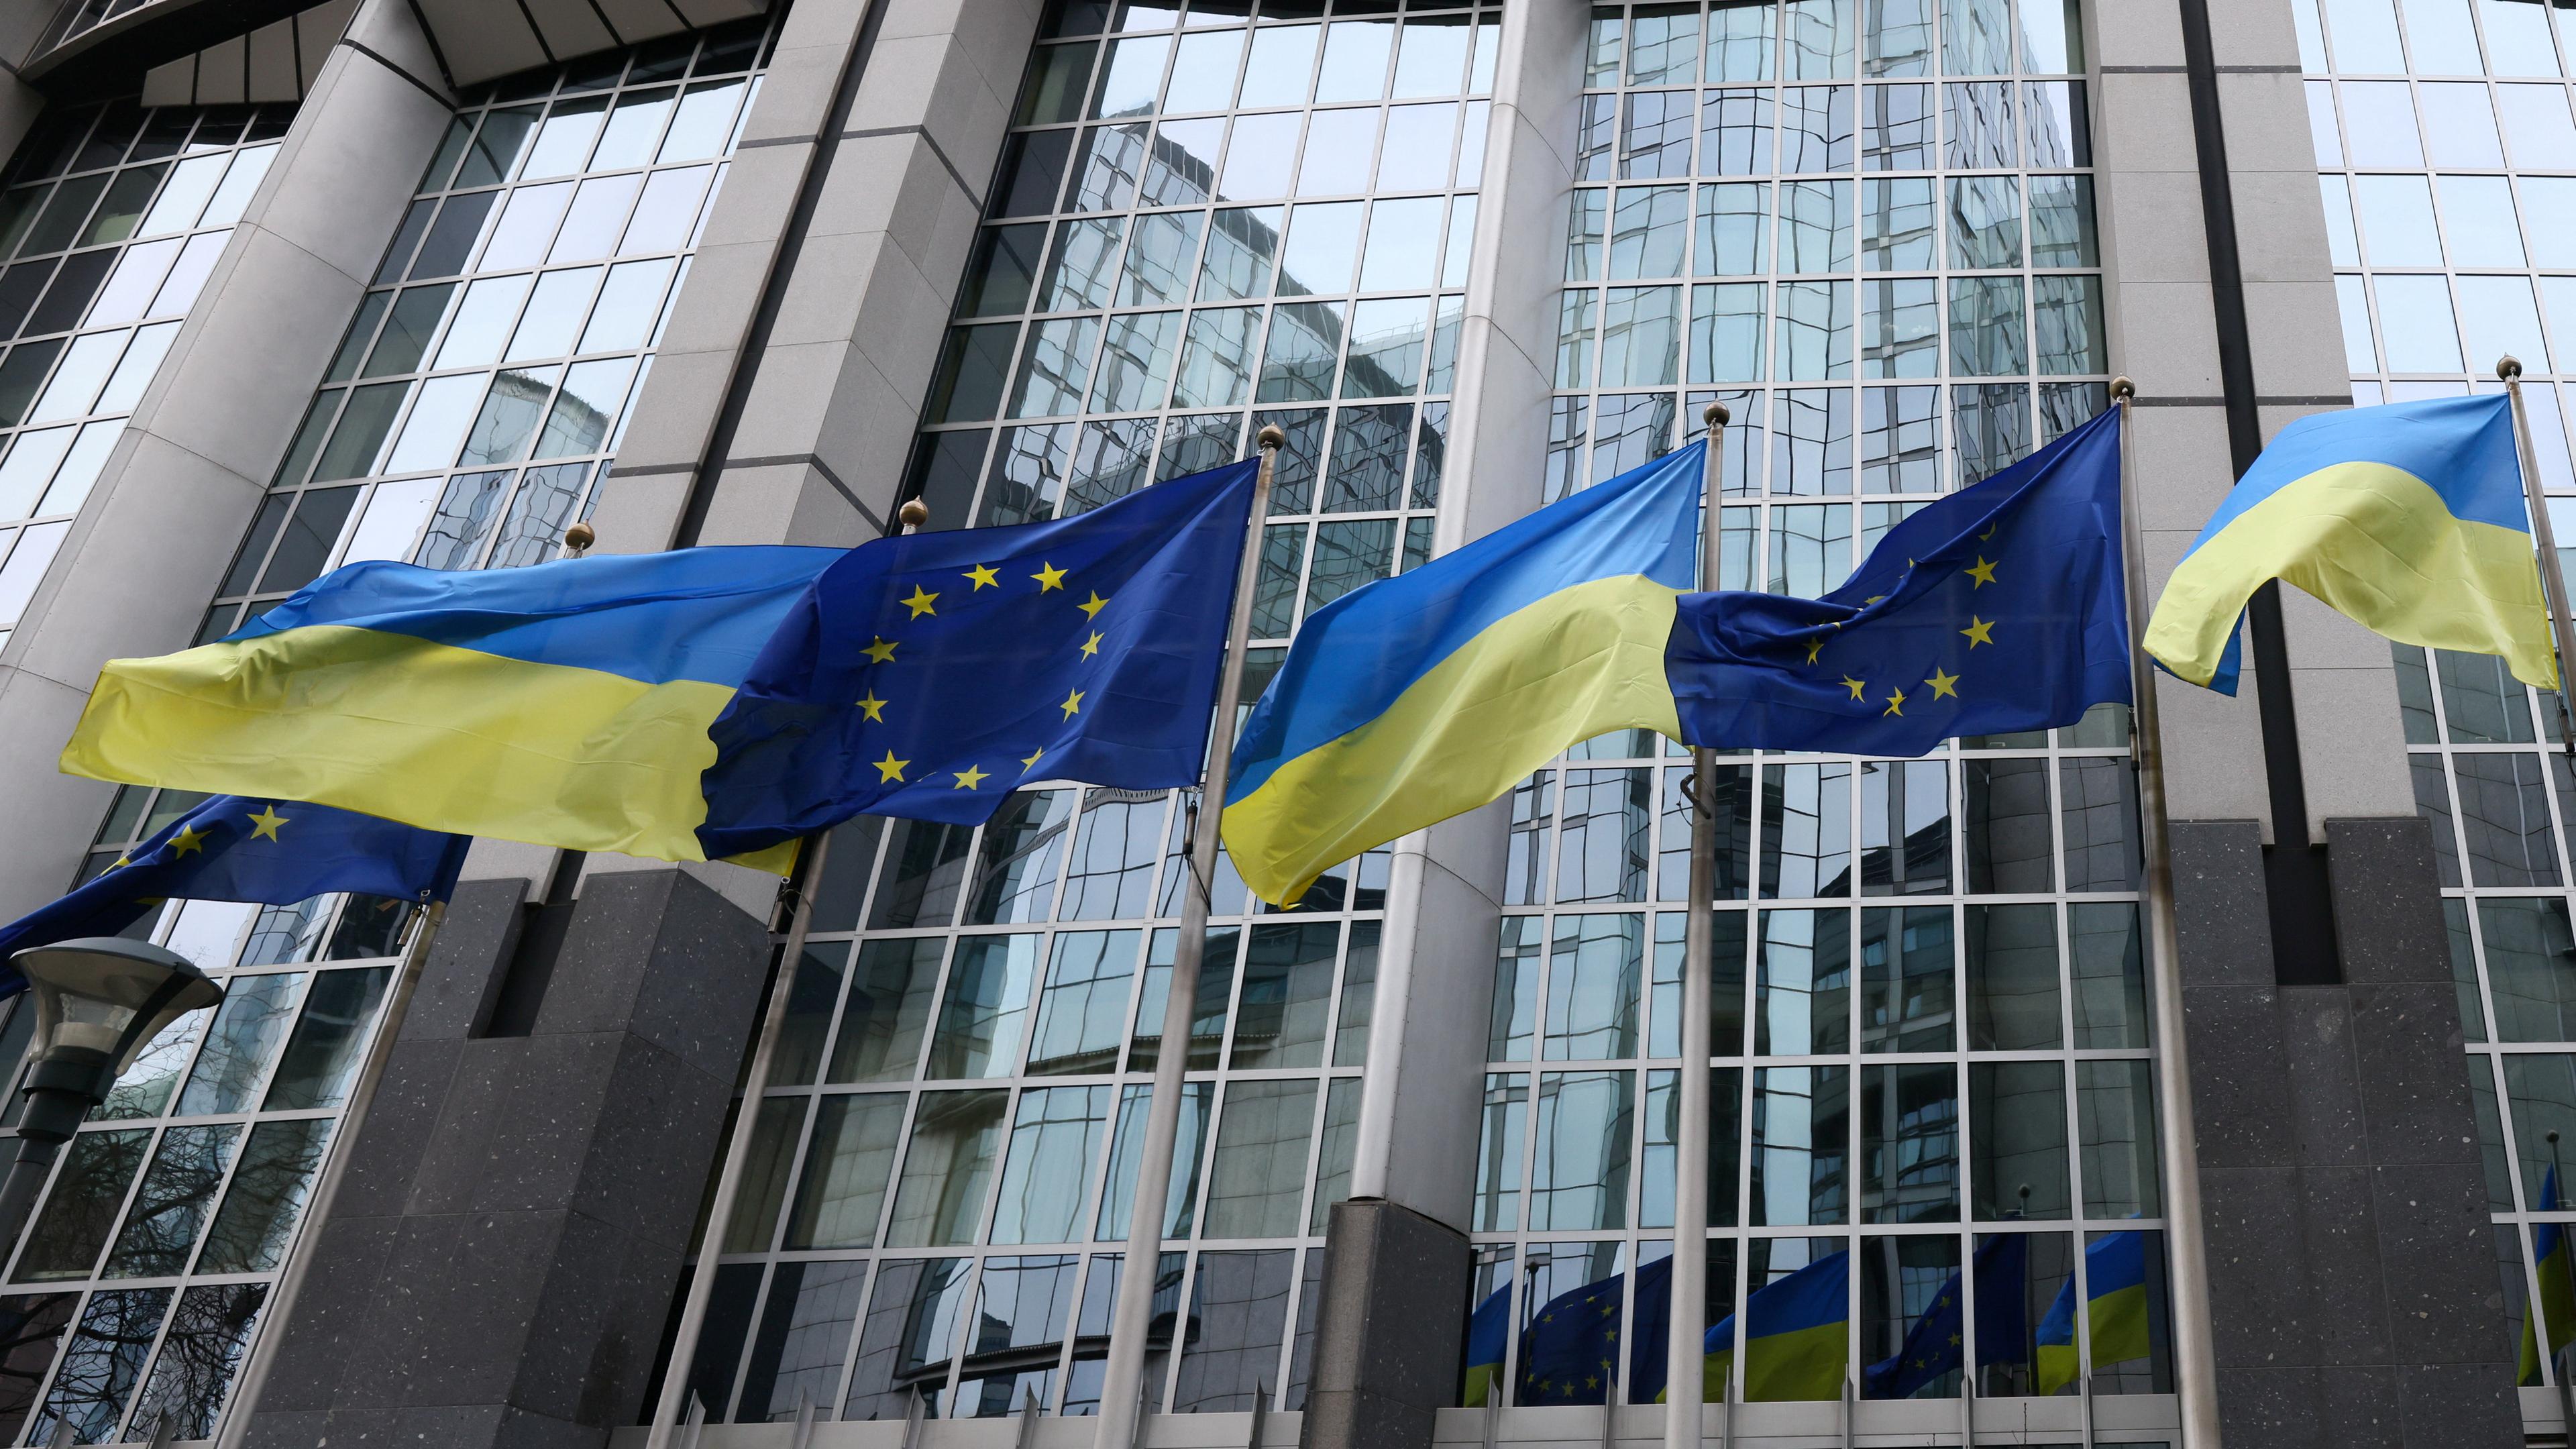 Flags of Ukraine fly in front of the EU Parliament building on the first anniversary of the Russian invasion, in Brussels, Belgium February 24, 2023